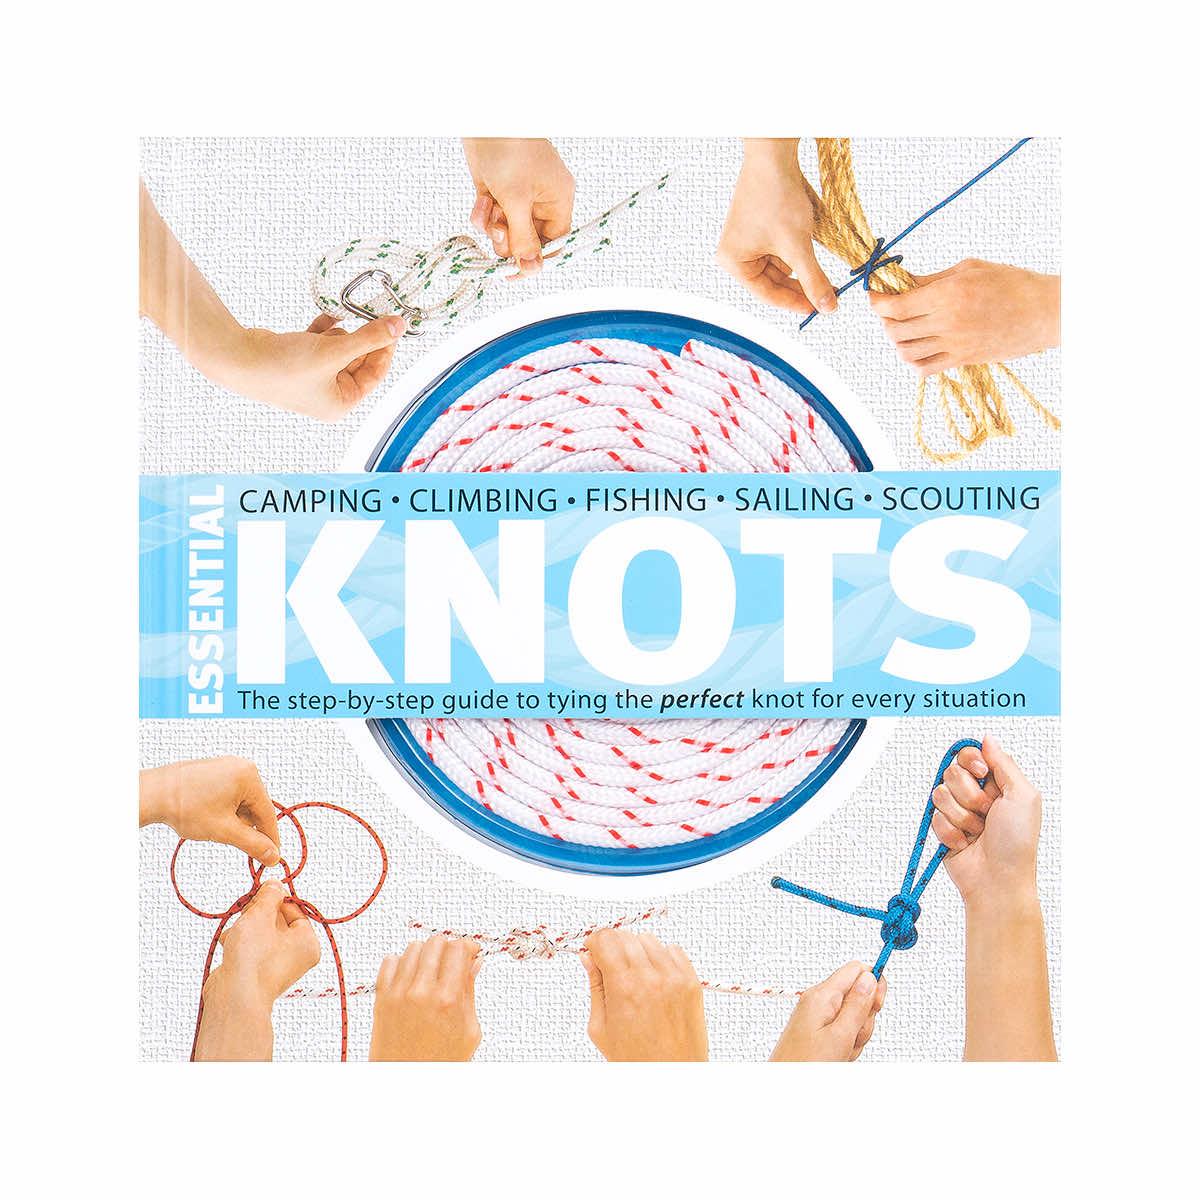 How To Tie The Required Scouting Knots (With Practical Uses)